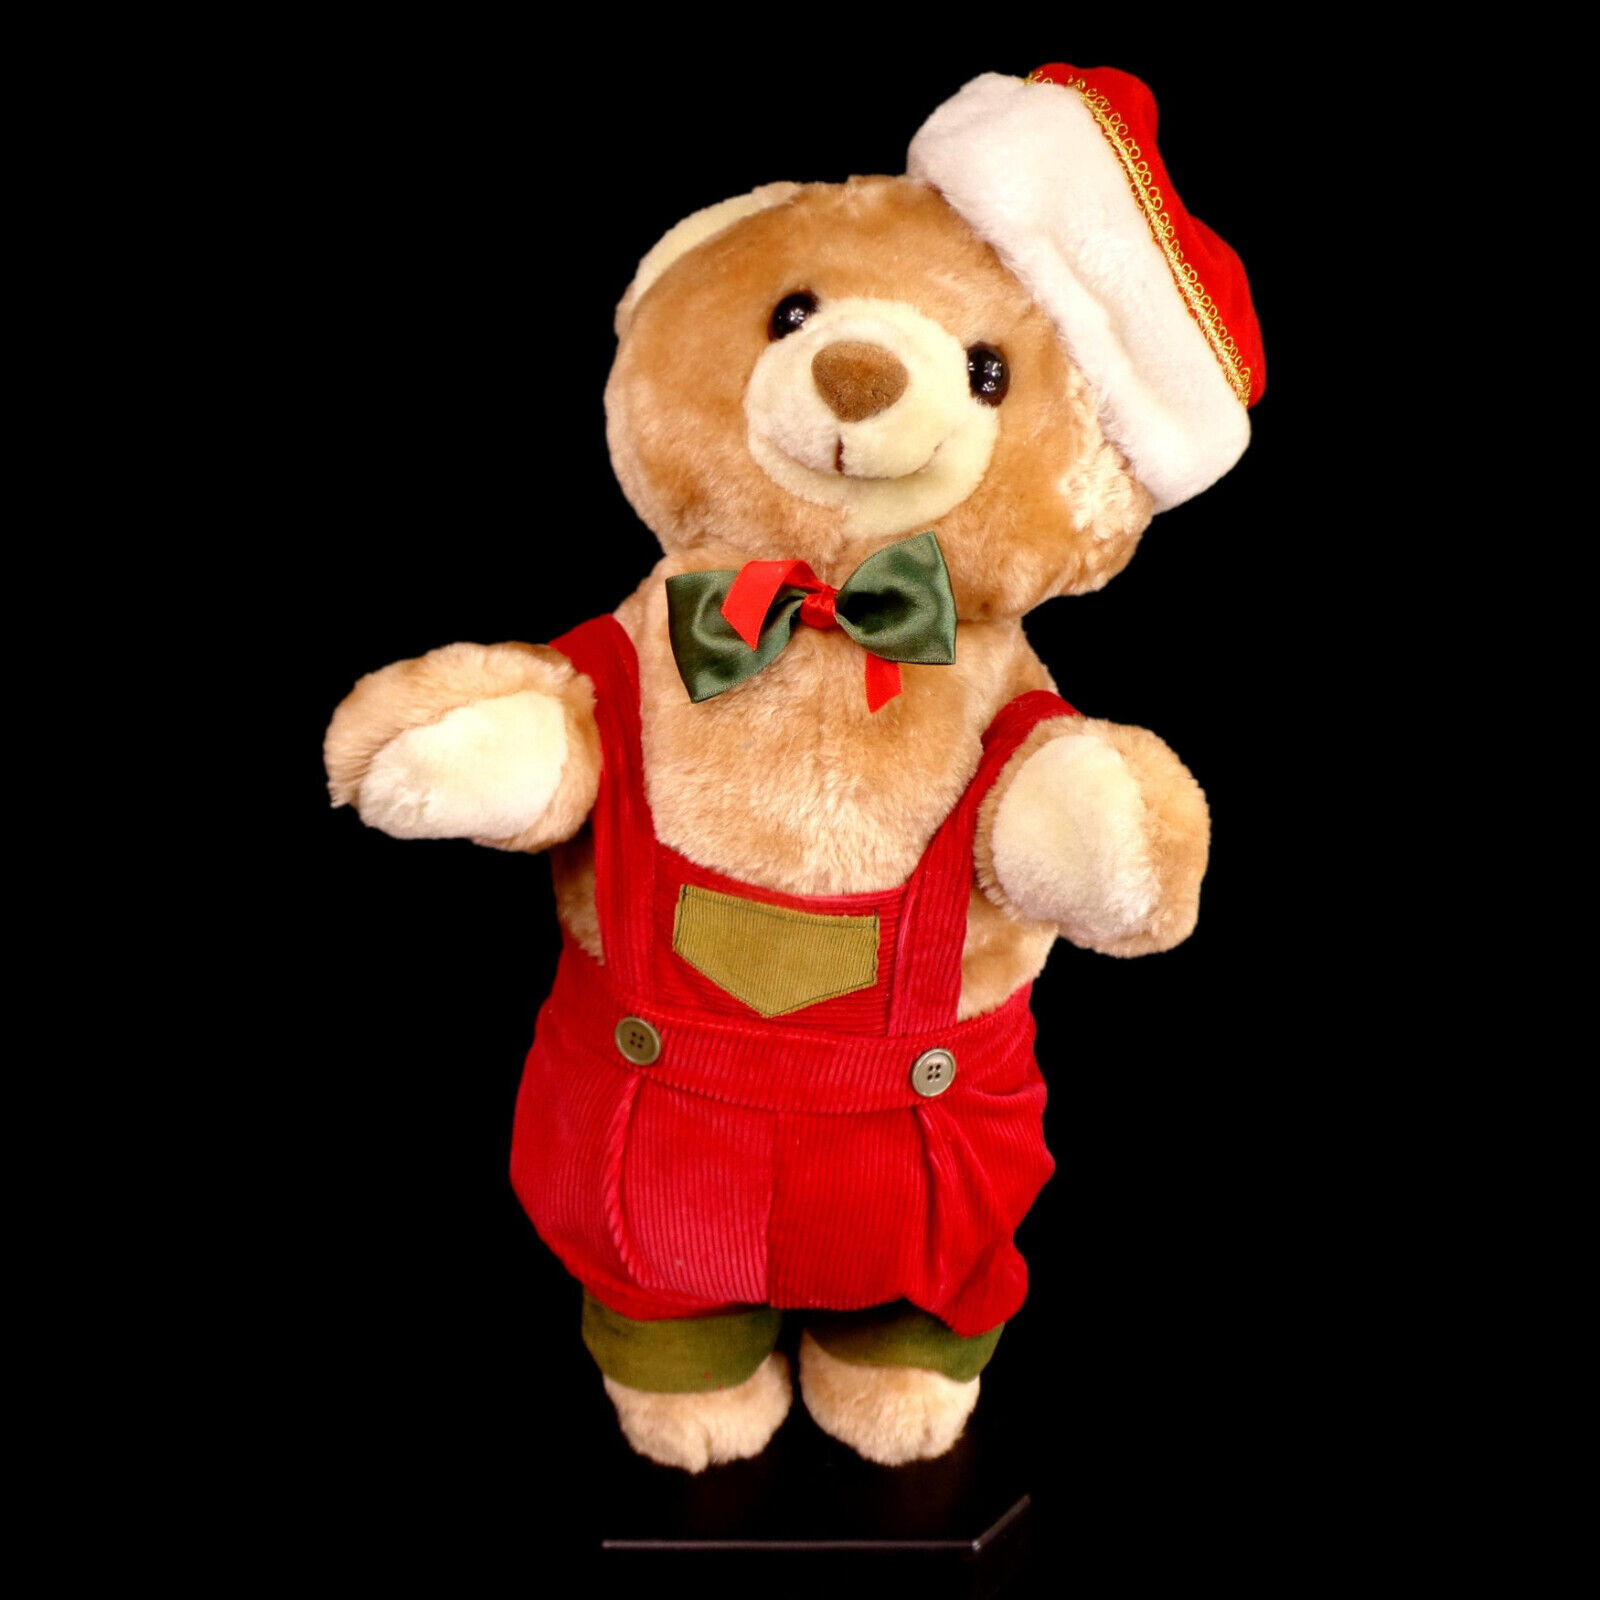 ANIMATED CHRISTMAS TEDDY BEAR / MADE in TAWIAN / PLUSH / VINTAGE 1990